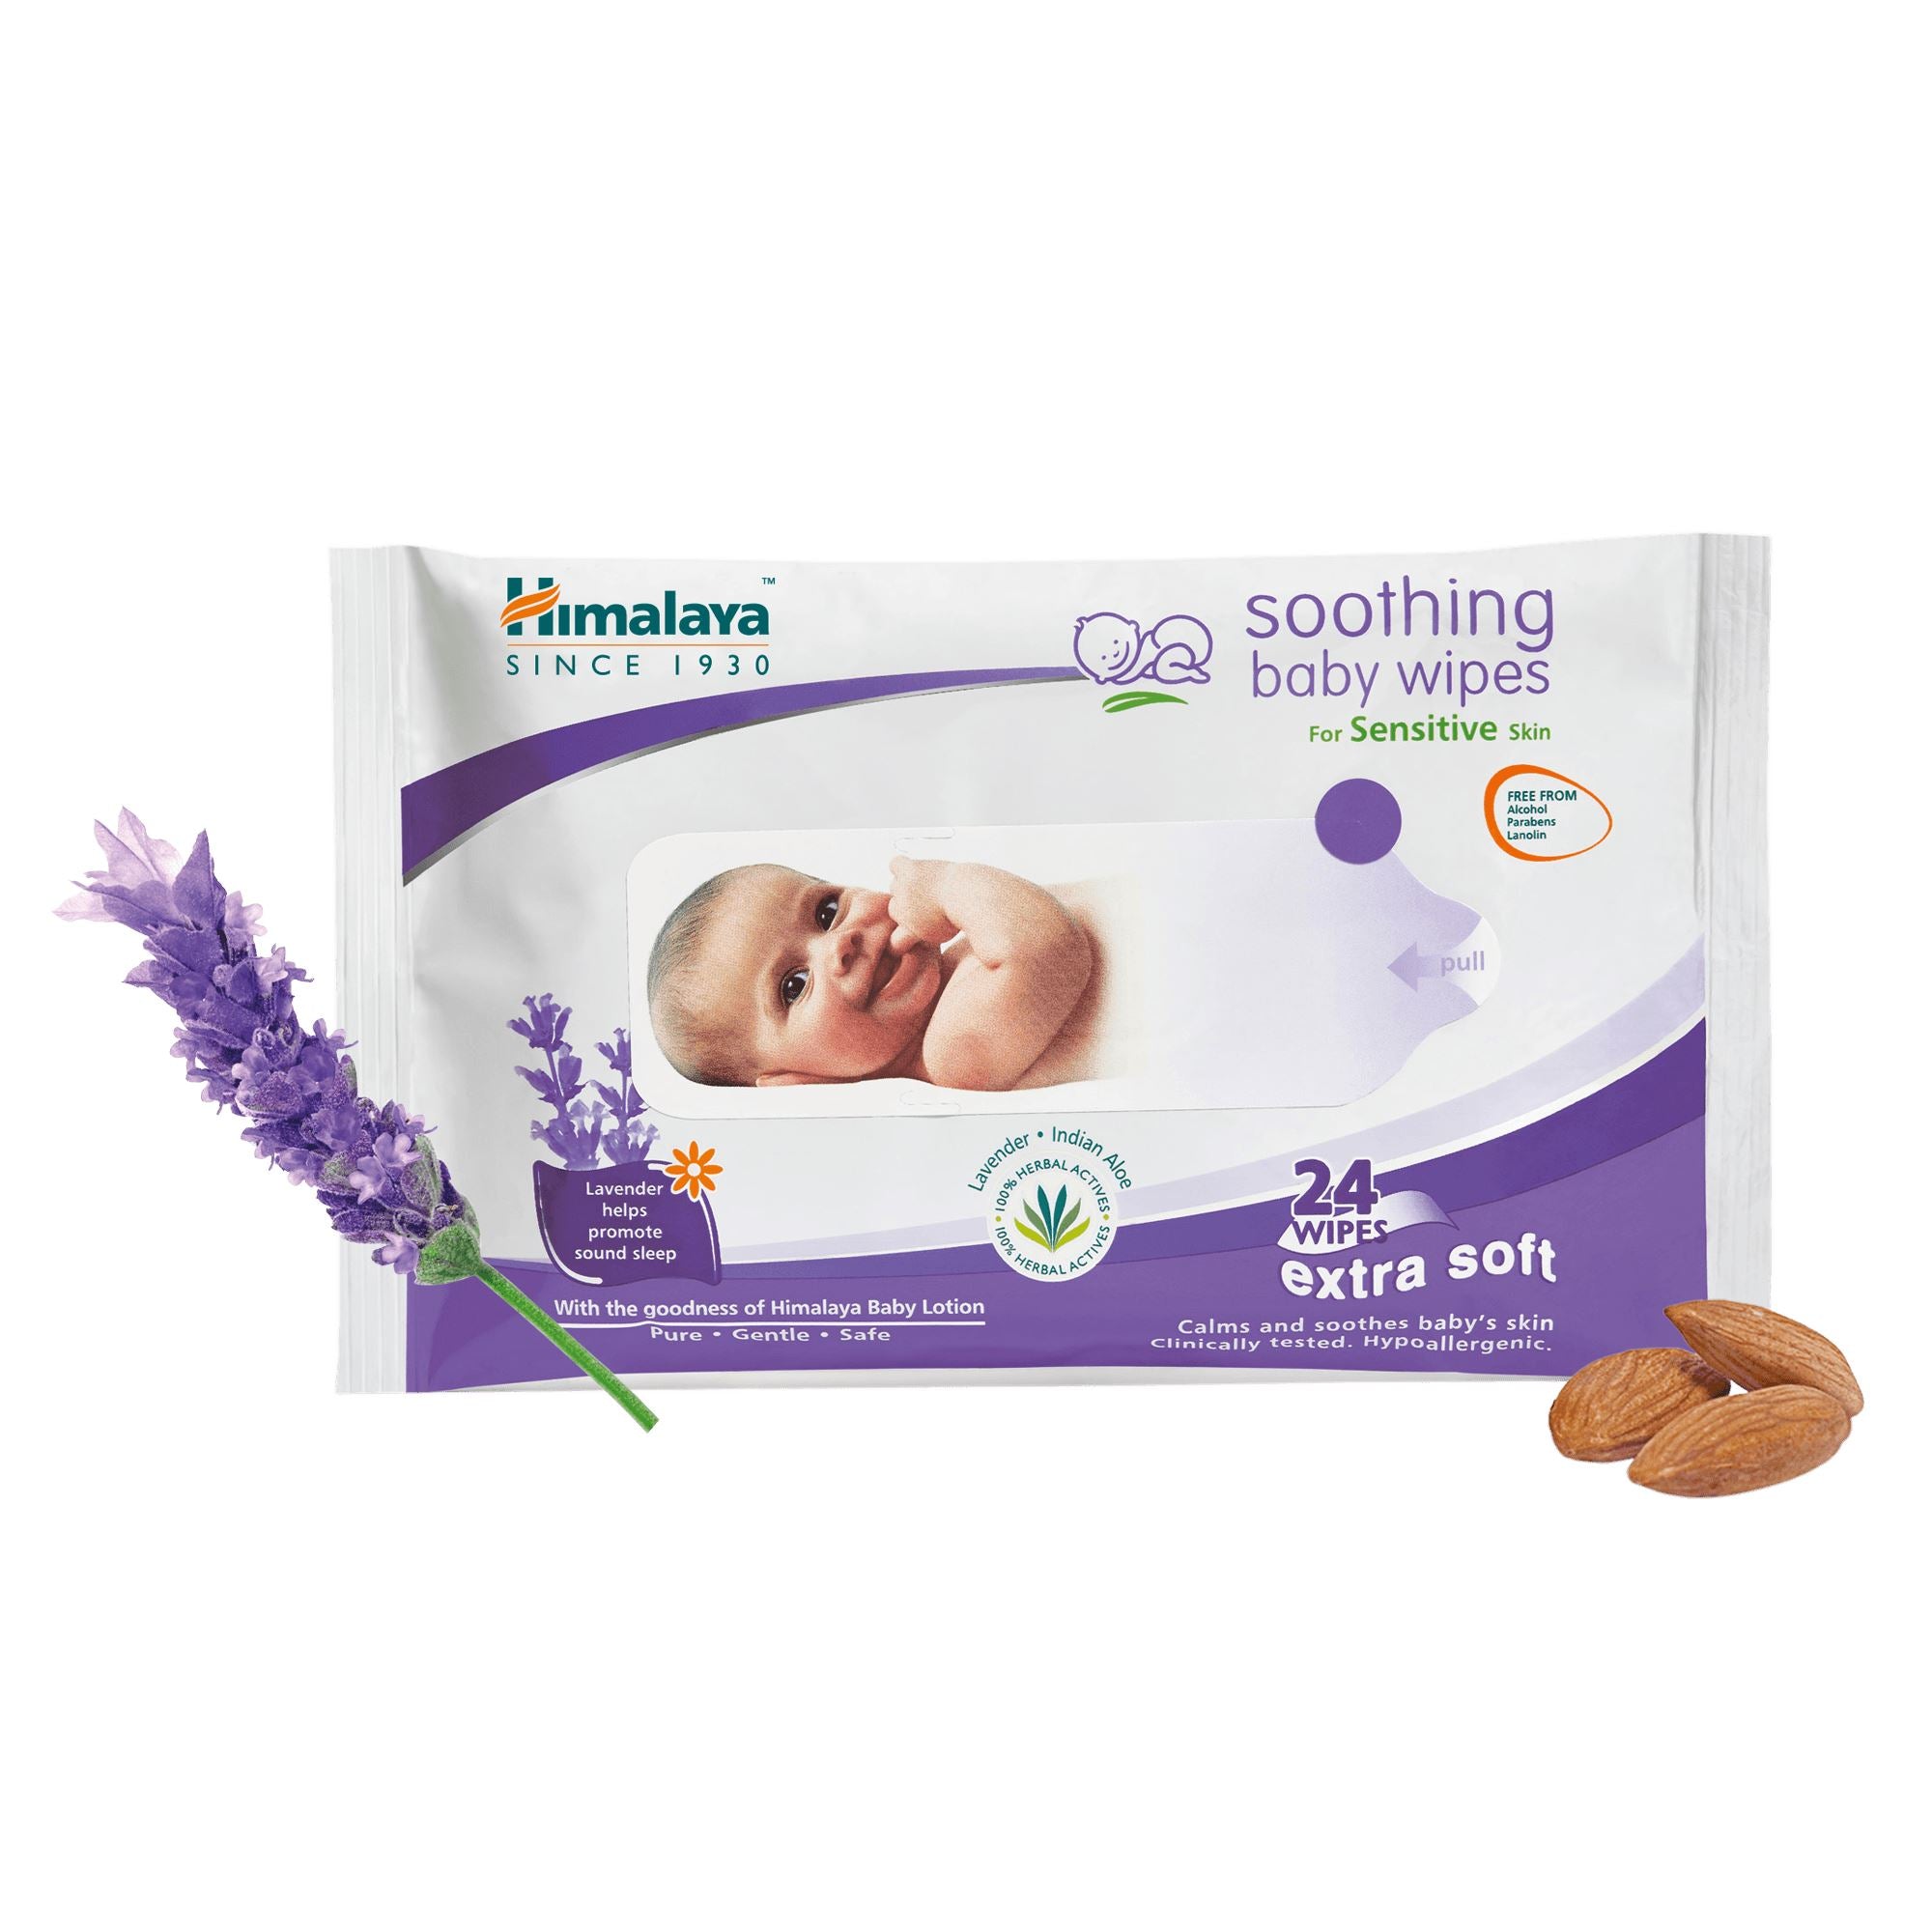 Himalaya soothing baby wipes 24s- Soothes skin and relaxes baby